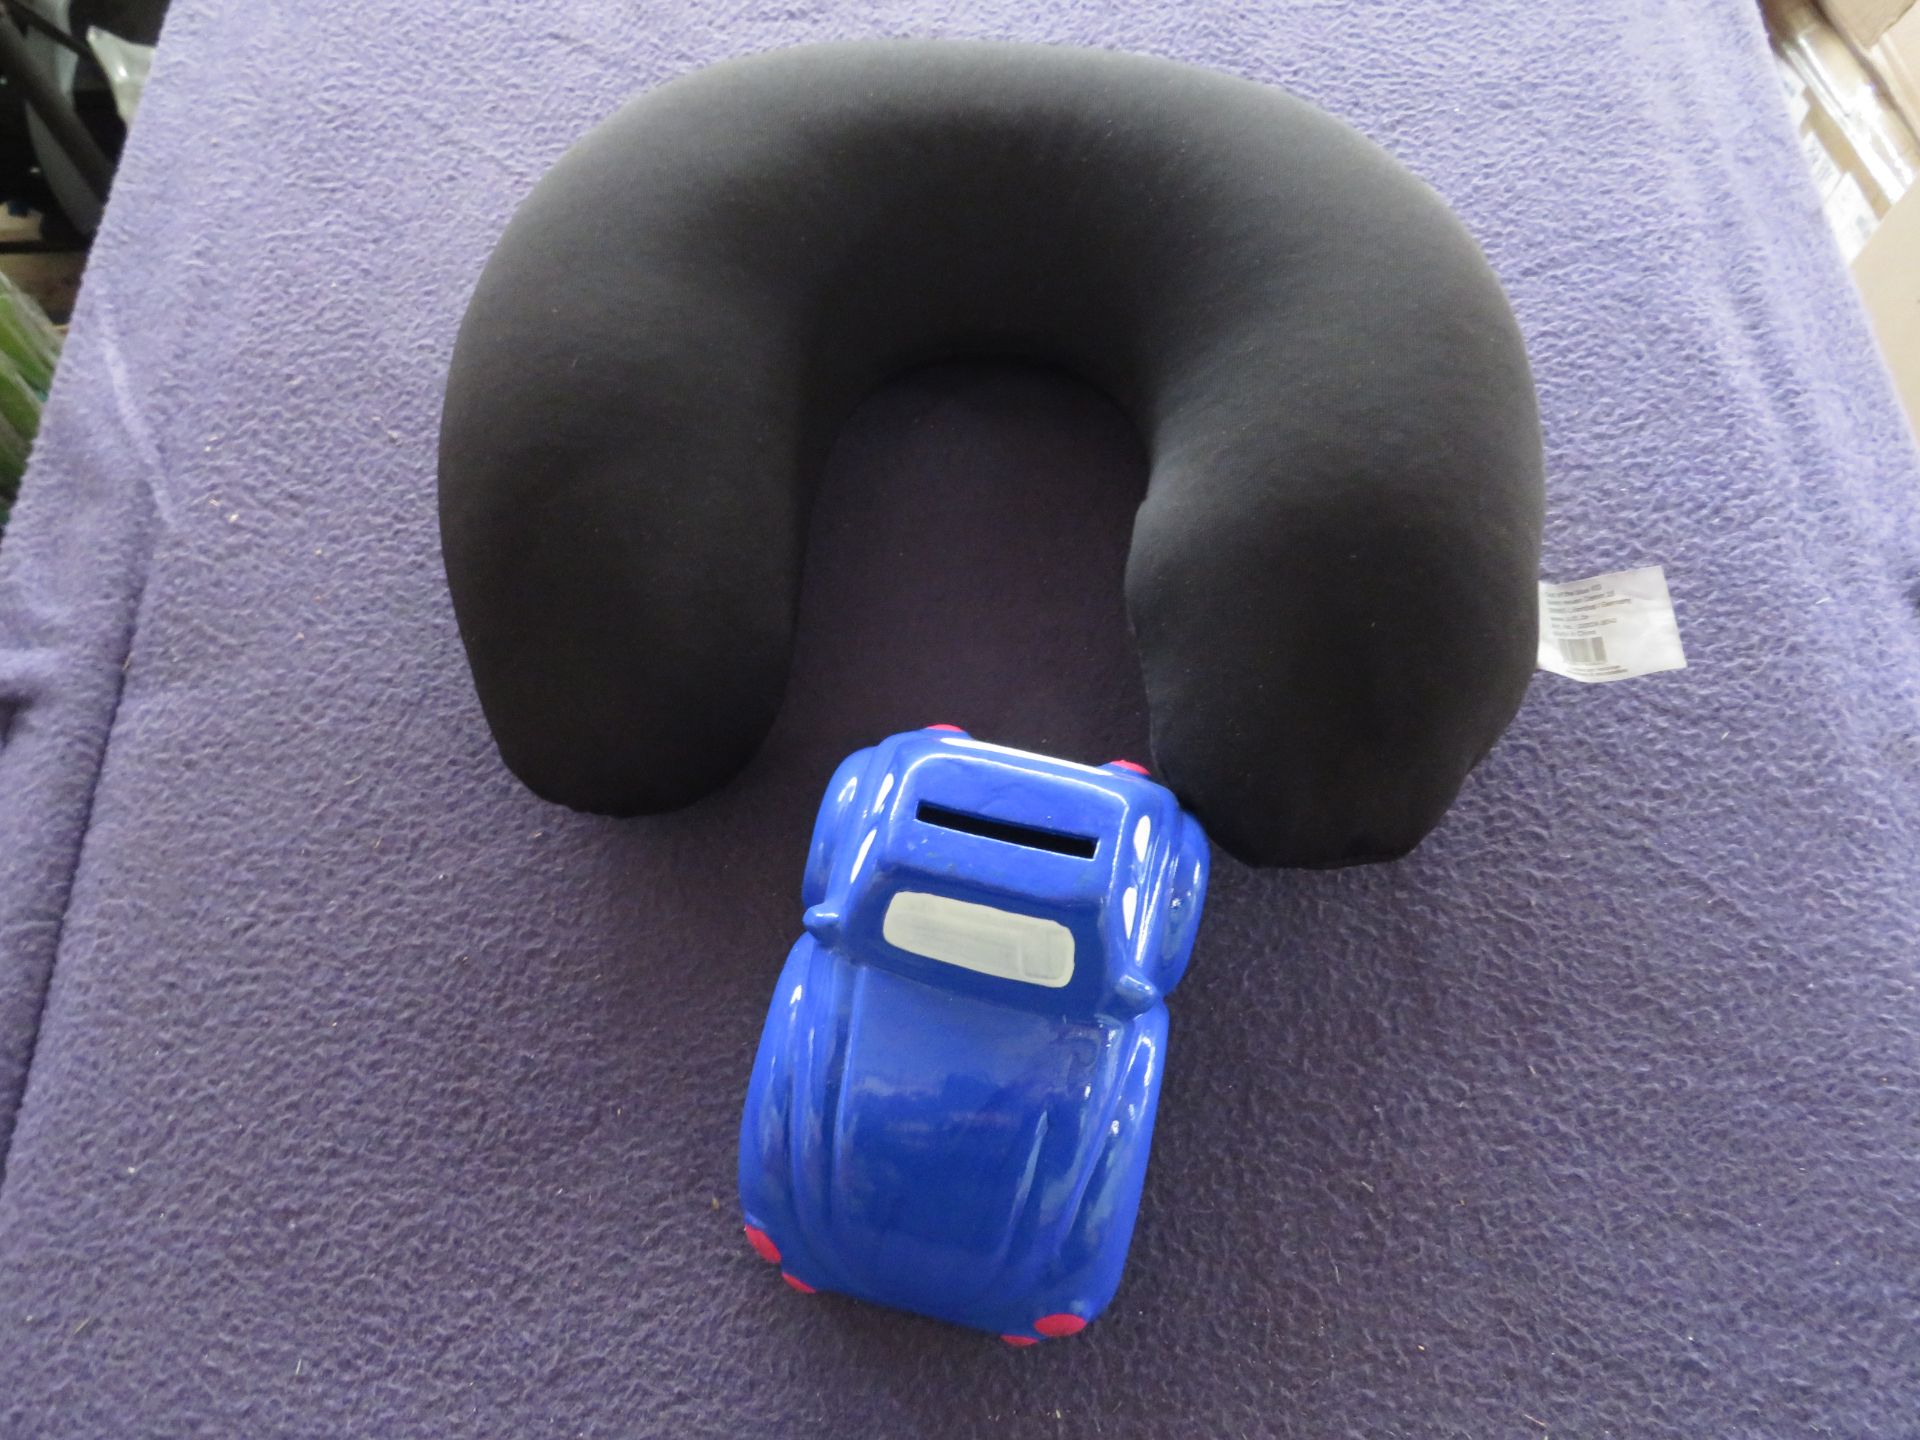 Black Travel Neck Cushion - Packaged. Blue Car Money Bank - Good Condition & Boxed.